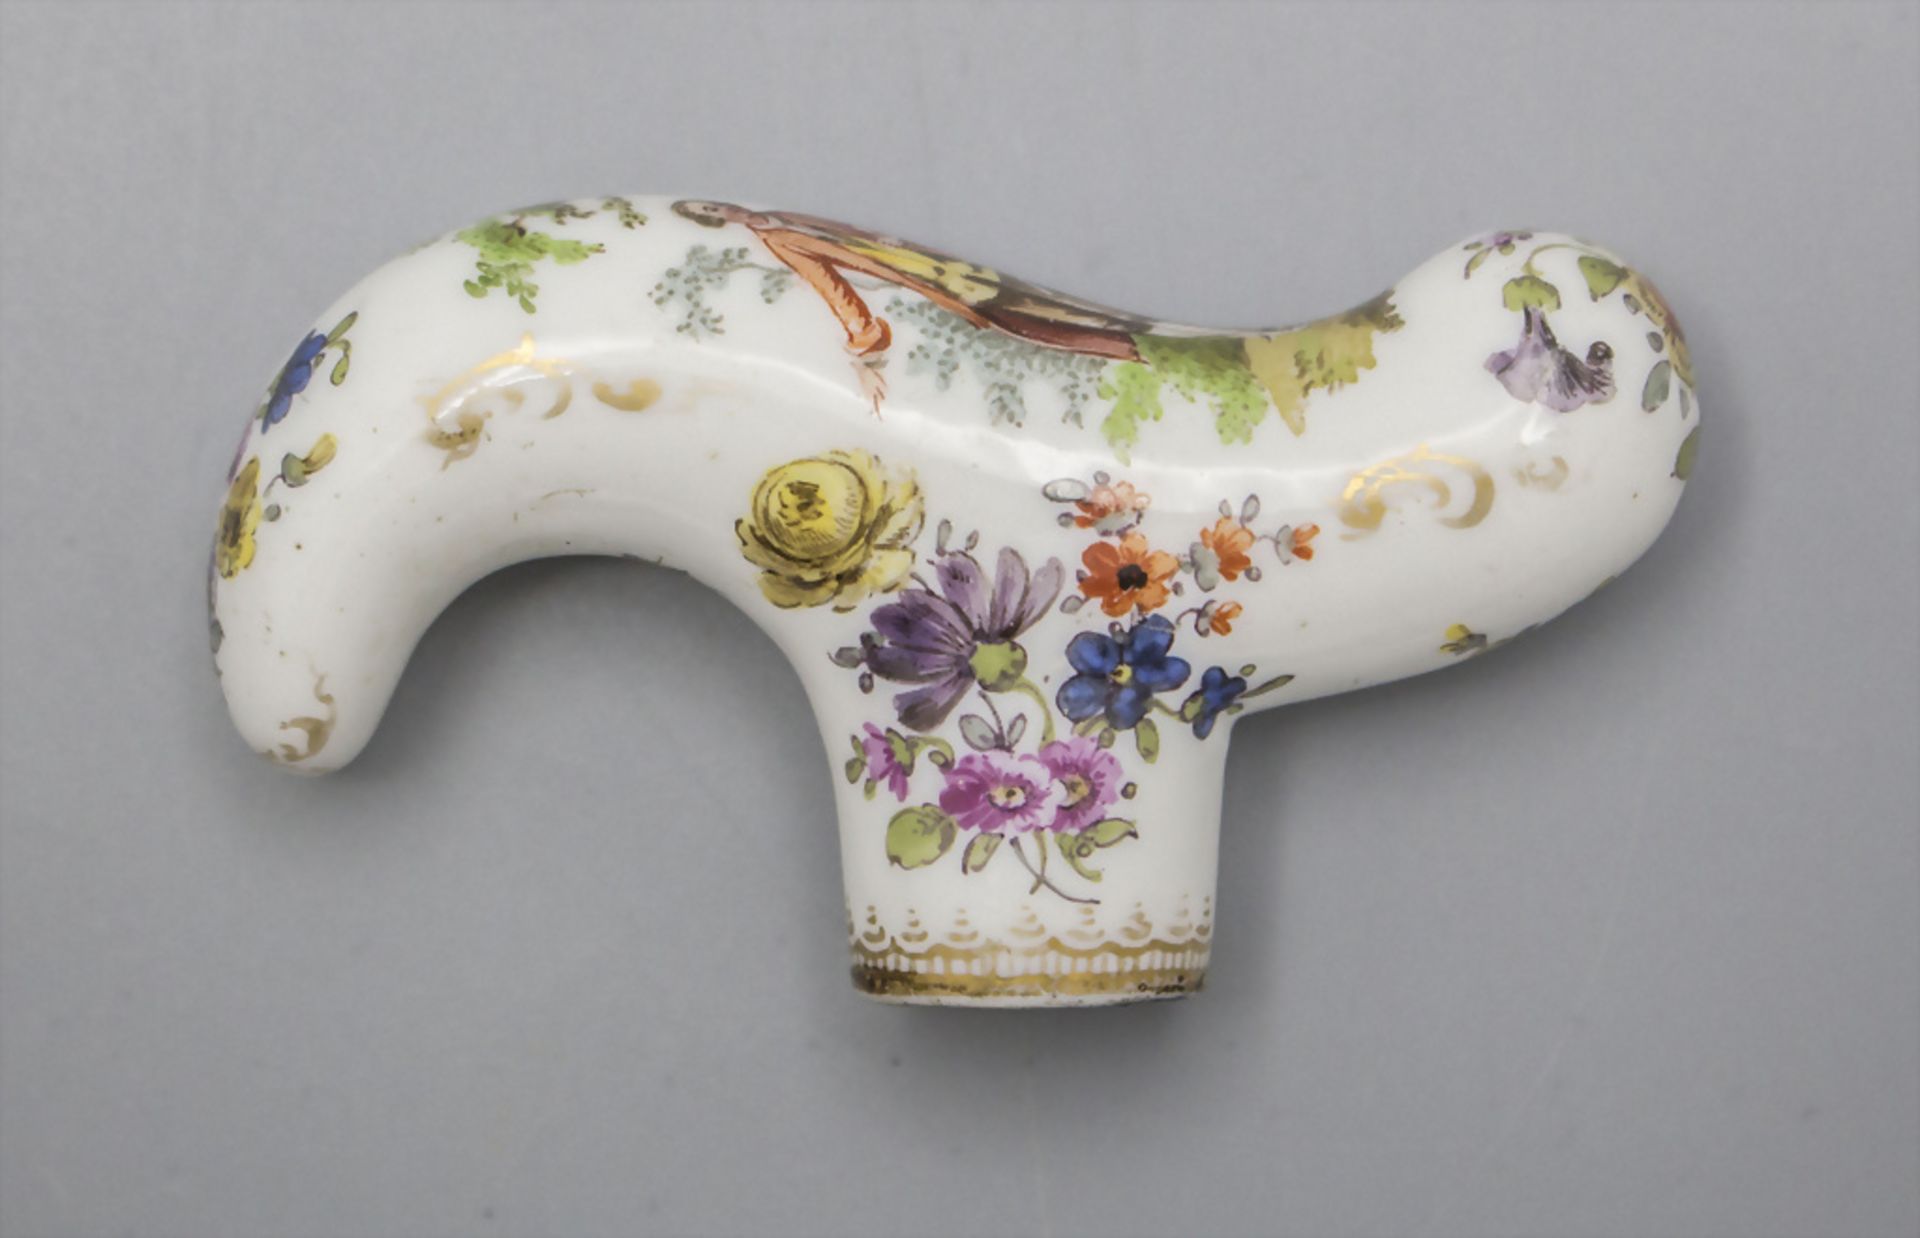 Stockgriff mit Watteauszene / A cane handle with courting scene, wohl Meissen, 19. Jh. - Image 3 of 4